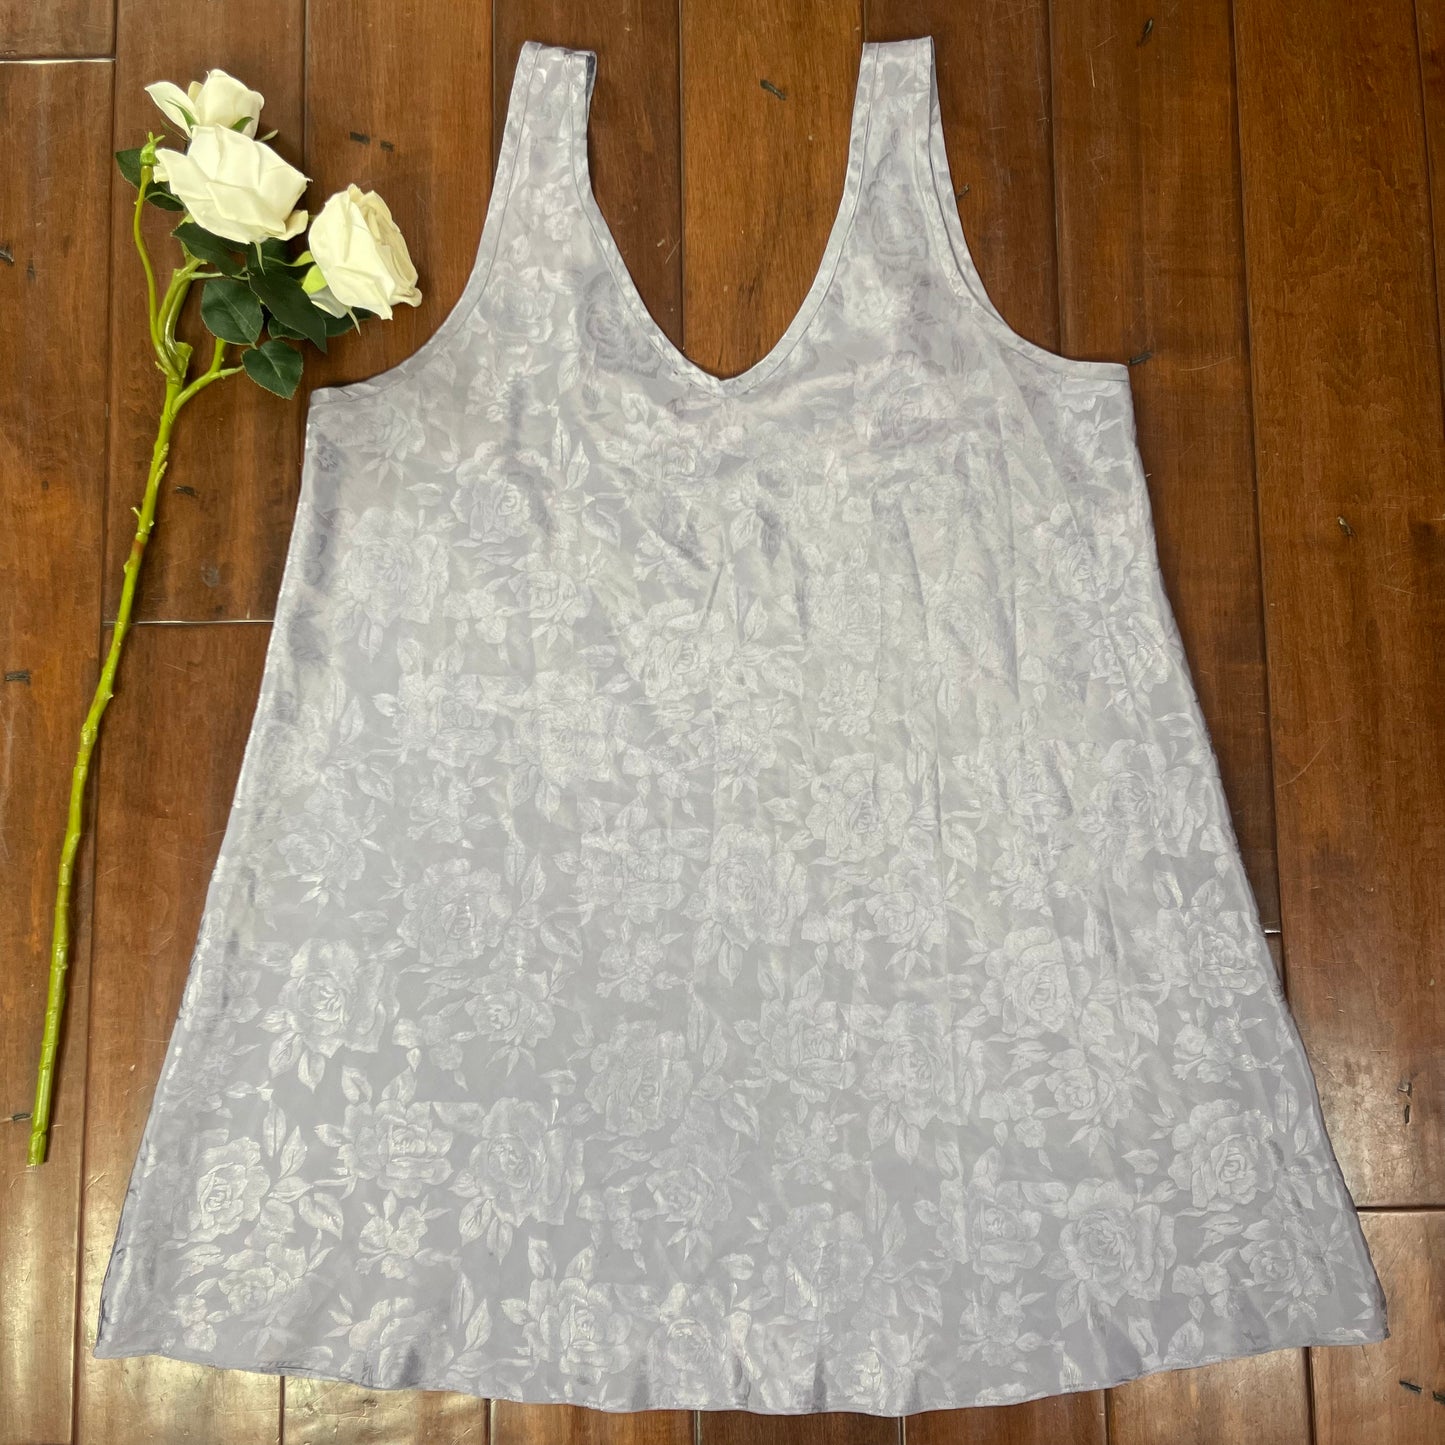 THRIFTED LILAC SLIP DRESS